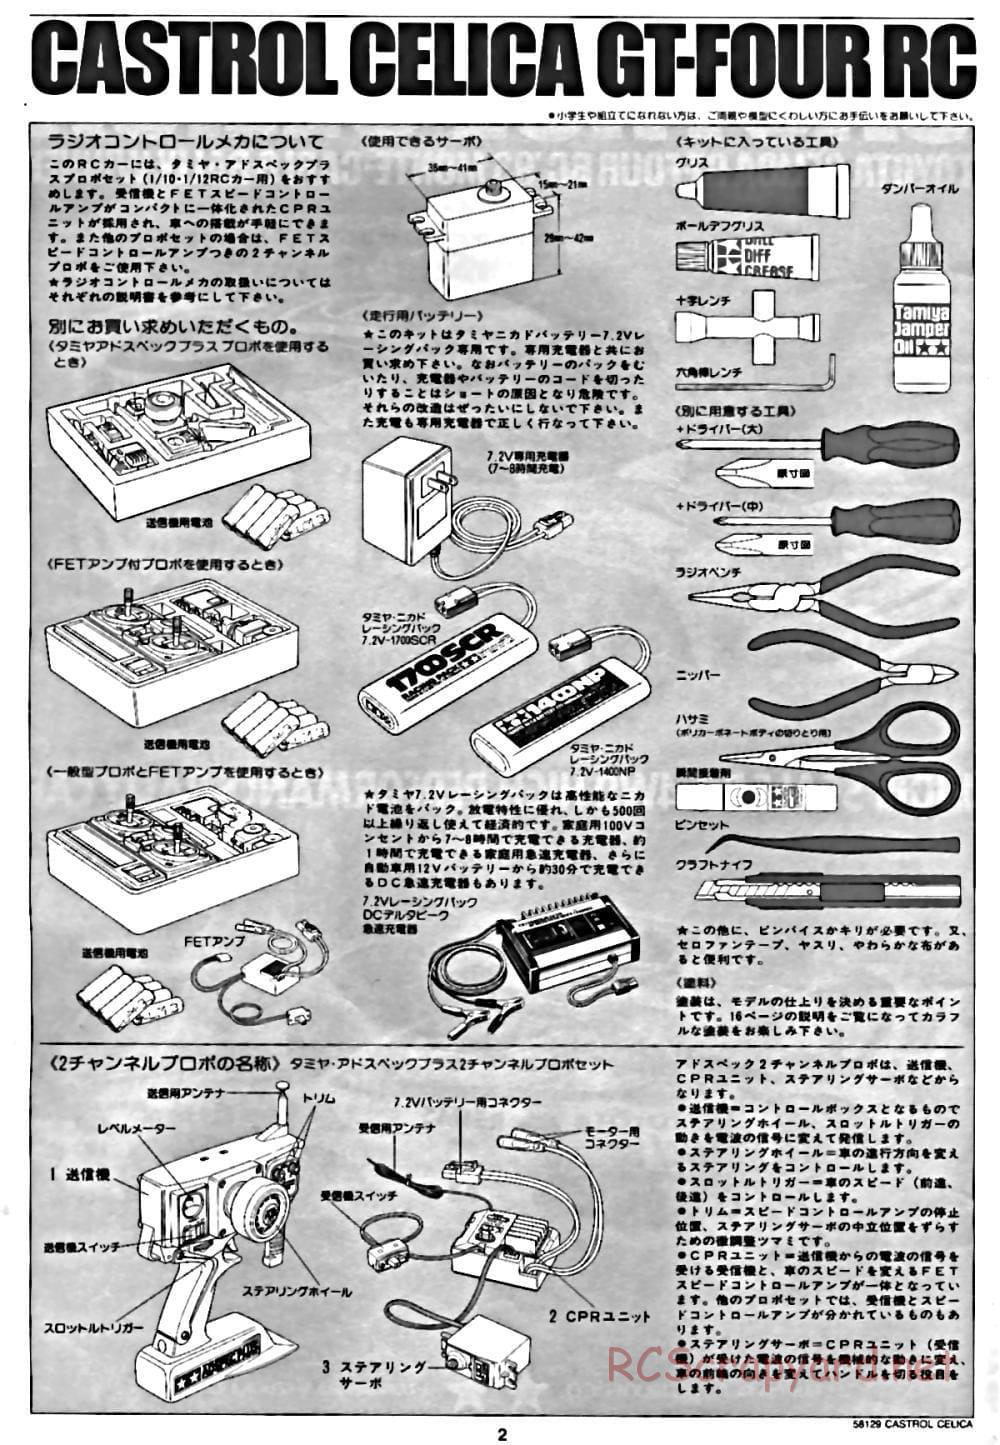 Tamiya - Castrol Celica 93 Monte-Carlo - TA-02 Chassis - Manual - Page 2